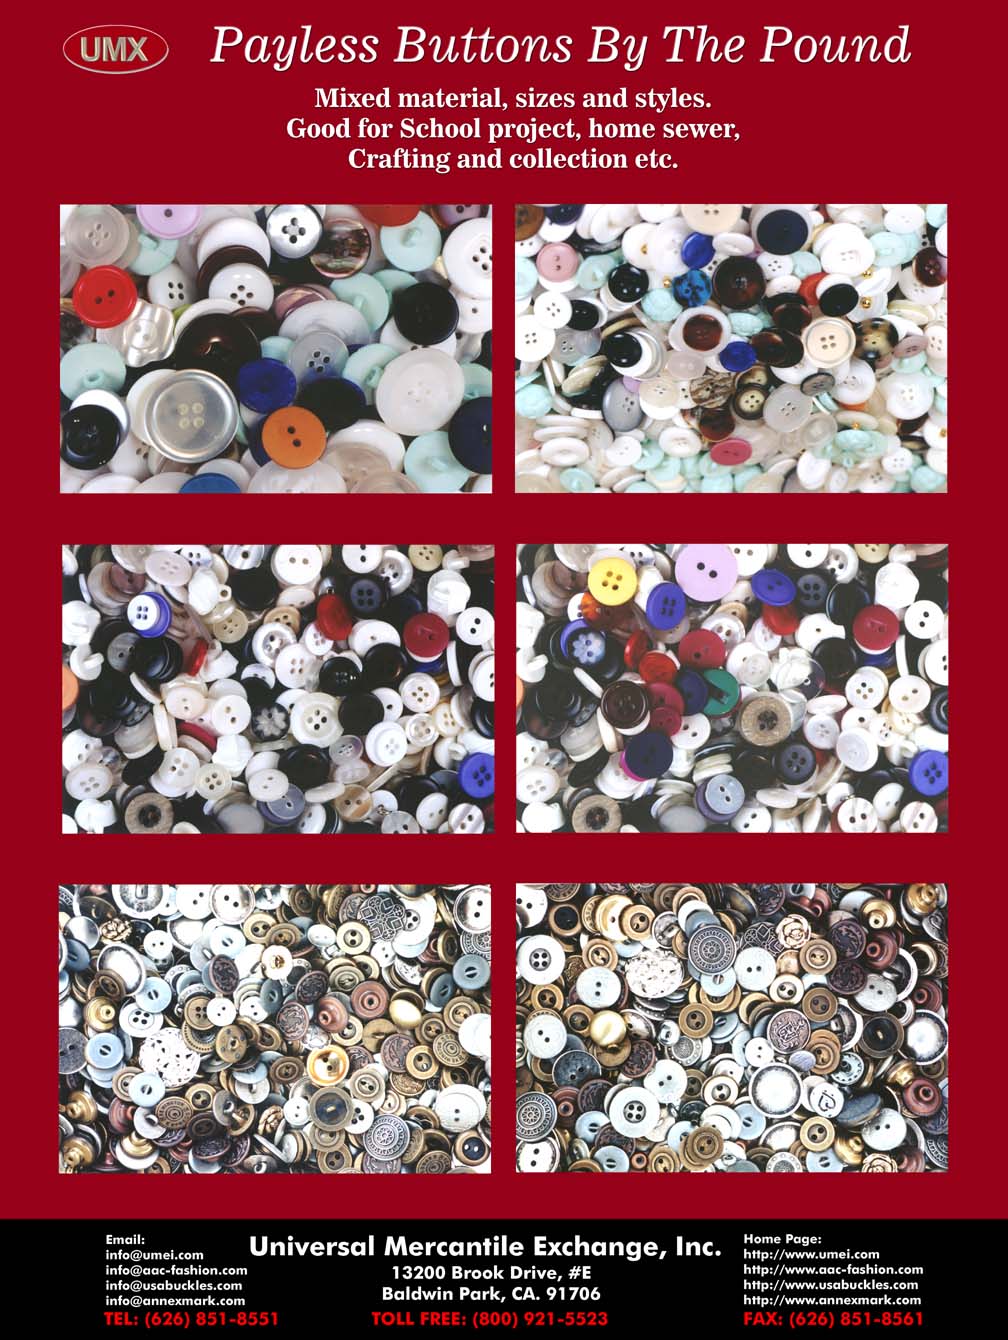 Large Picture of buttons-by-the-pound-catalogue The Cheap buttons Series